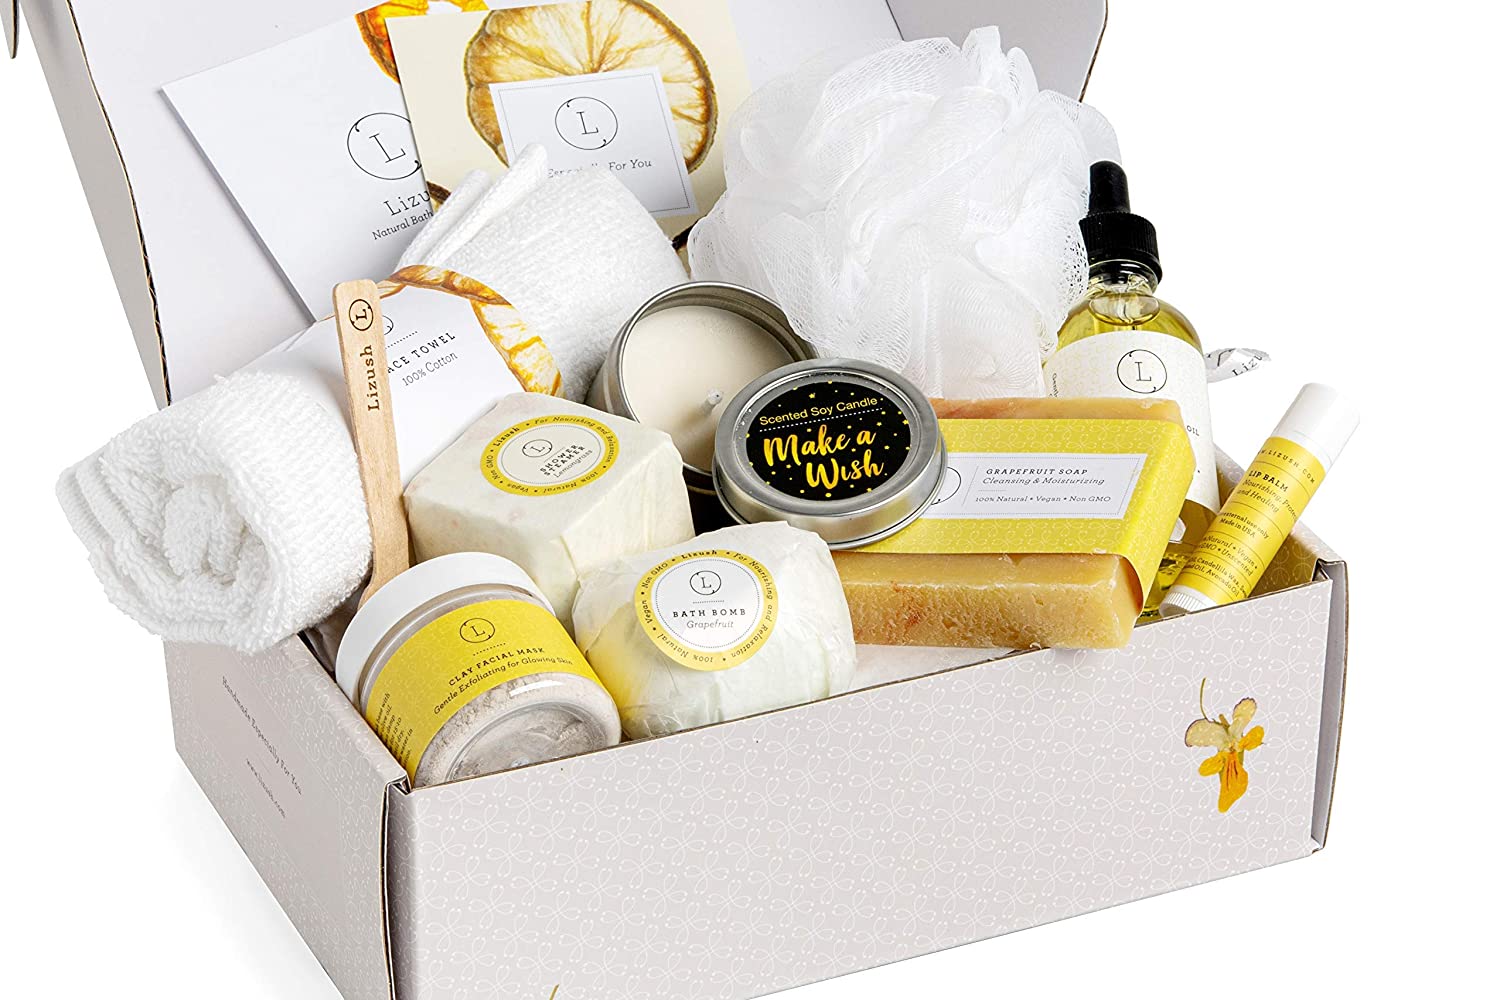 20 Best Handmade Beauty Products for the Perfect Gifts